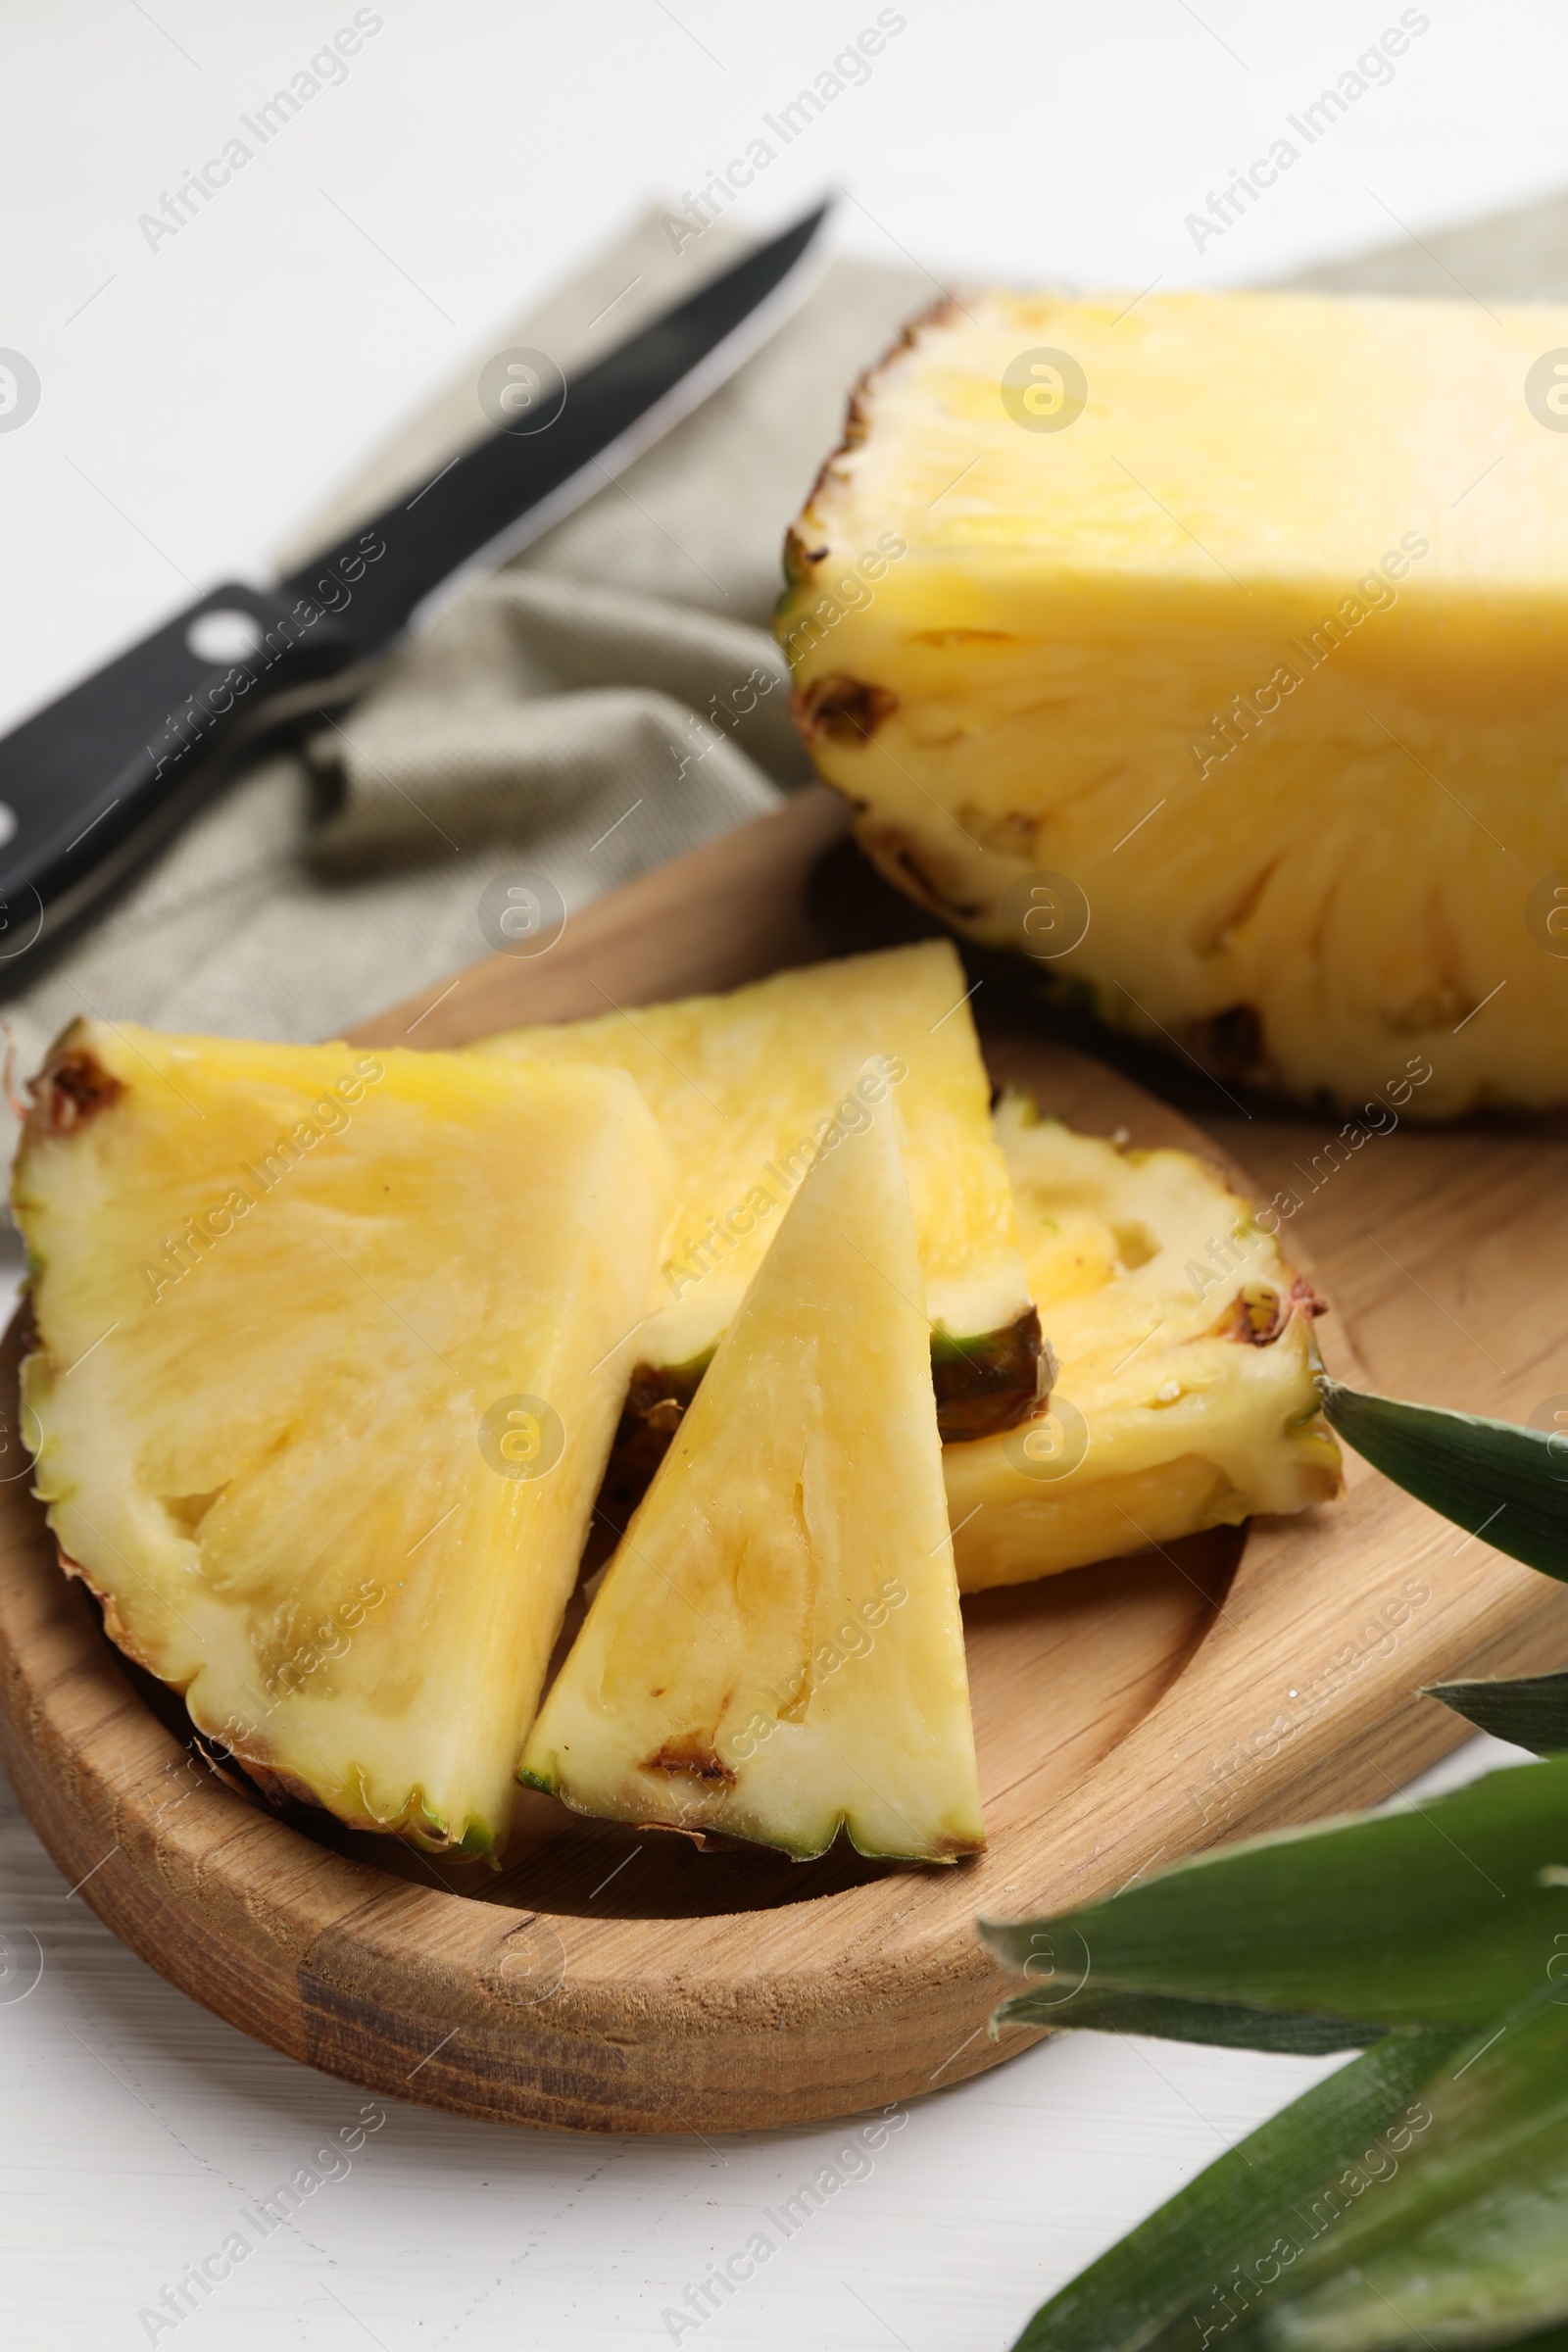 Photo of Slices of ripe juicy pineapple and knife on white table, closeup